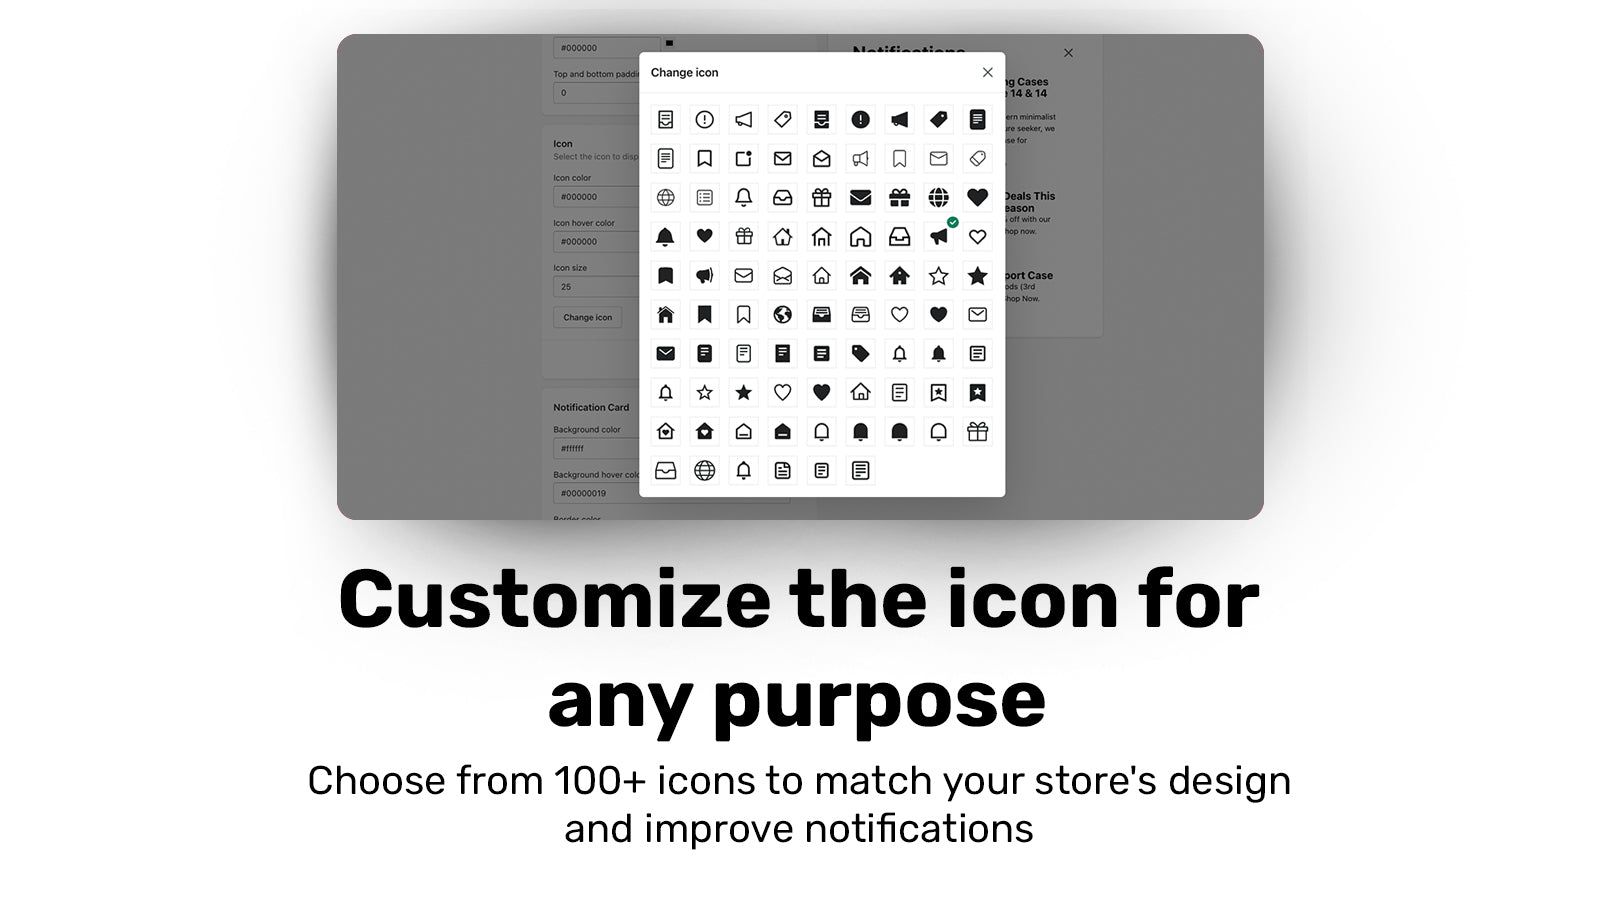 Customize the icon for any purpose